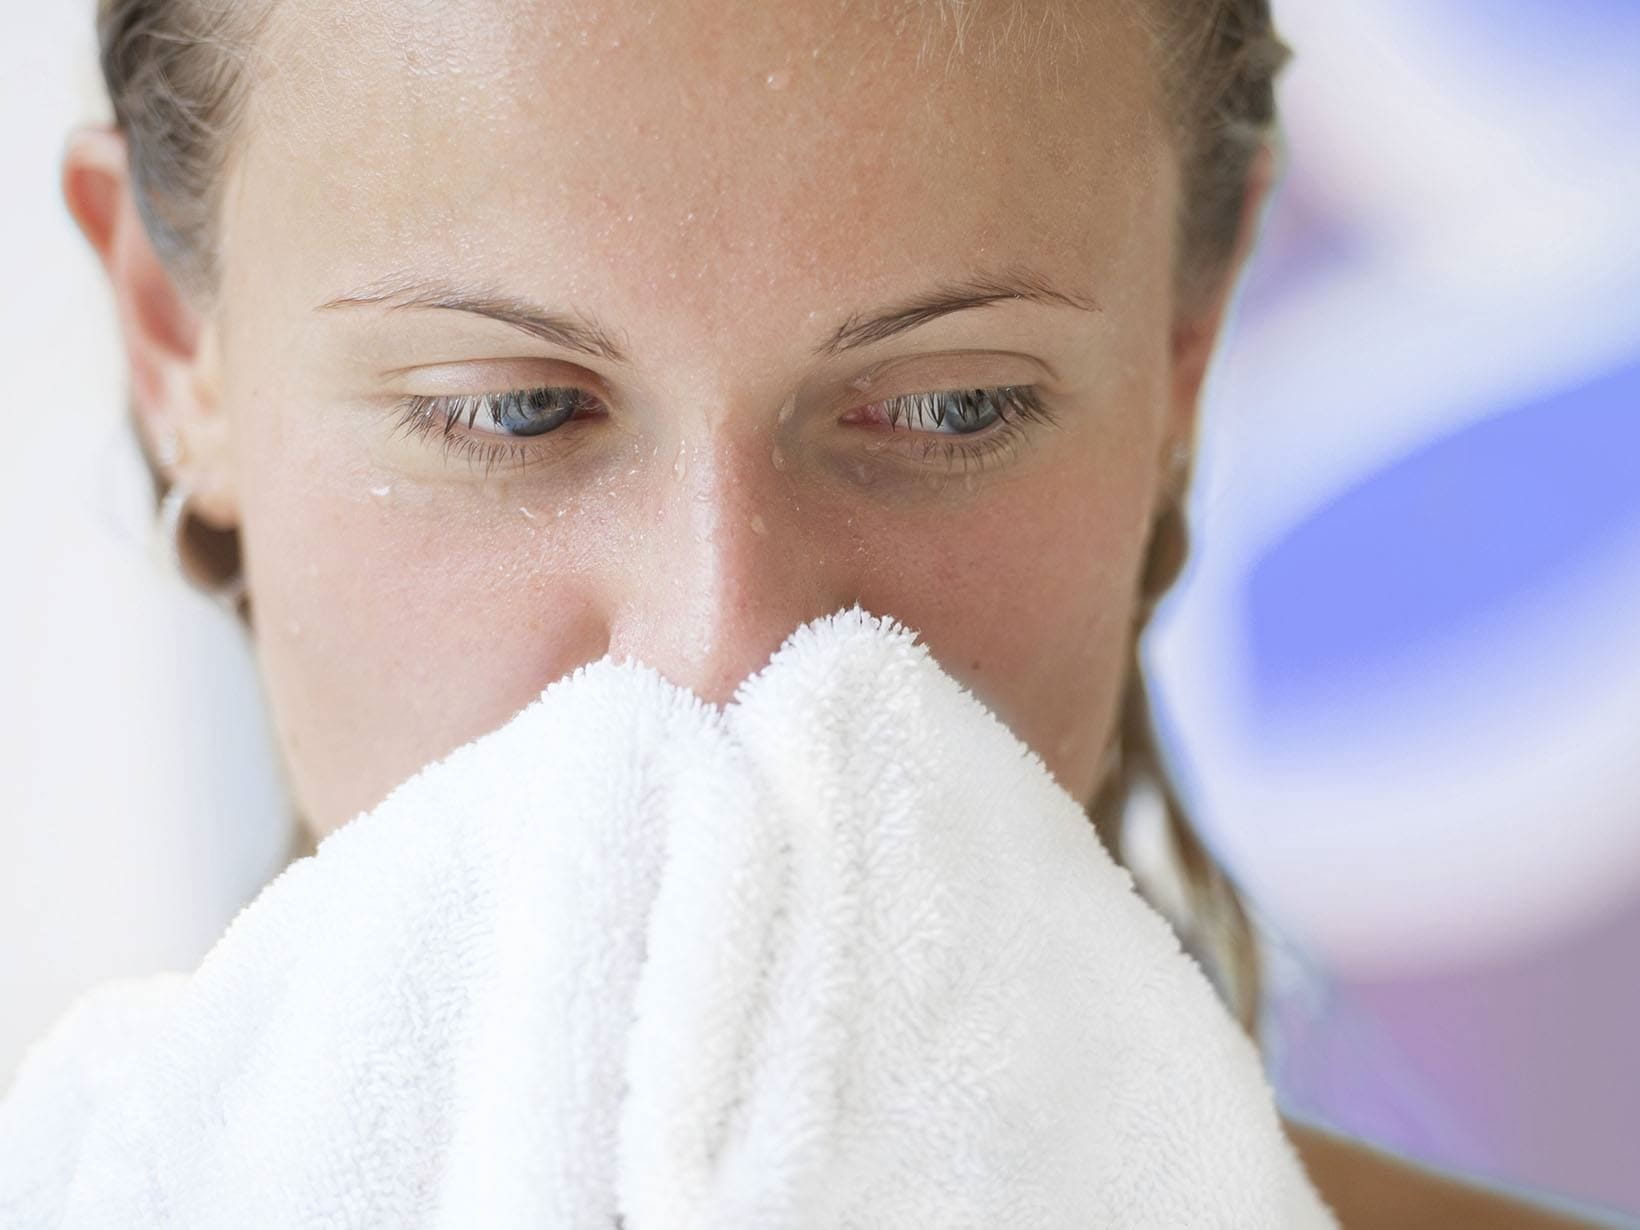 USE A TOWEL FOR A FACE MASSAGE WHEN DRYING